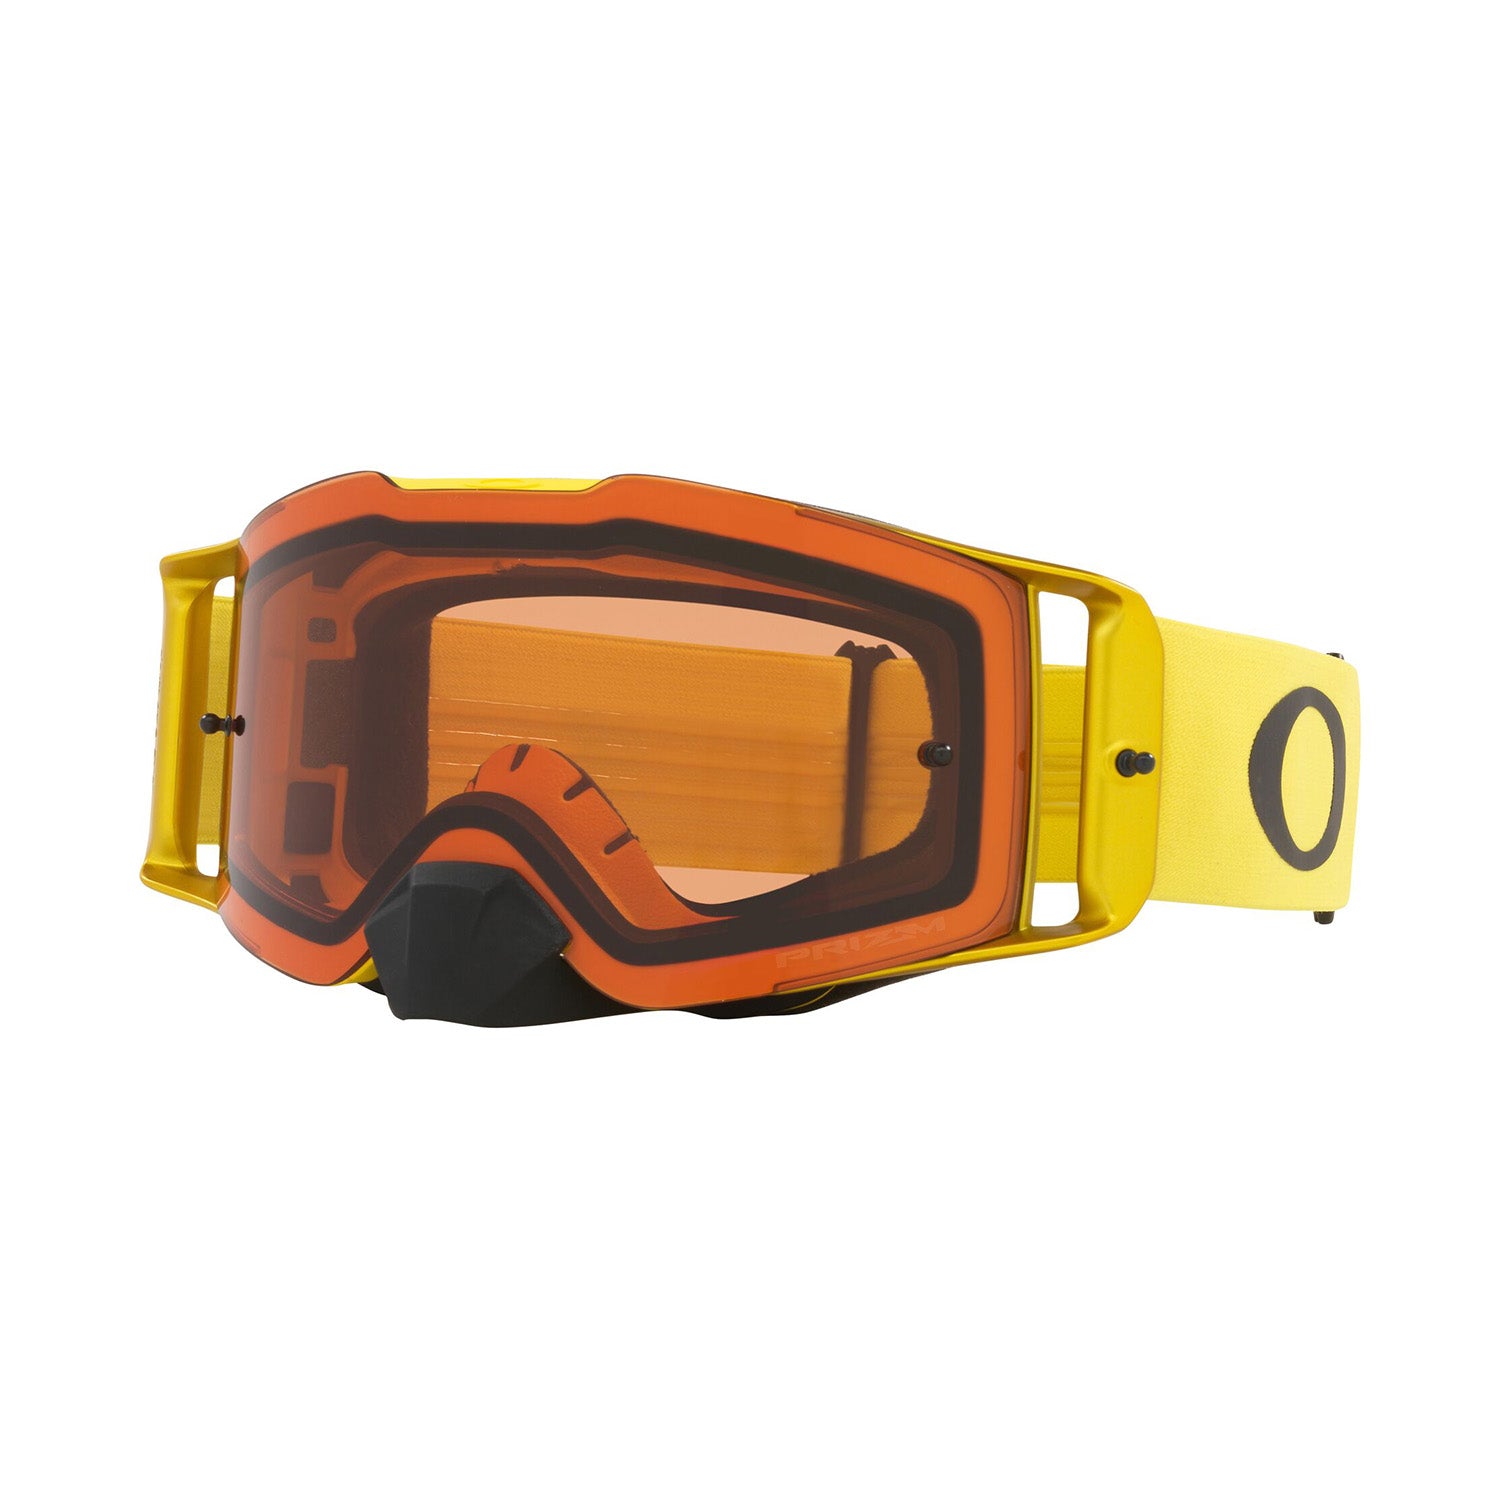 Oakley Front Line MX Goggle in Moto Yellow with Prizm Bronze Lens on white background